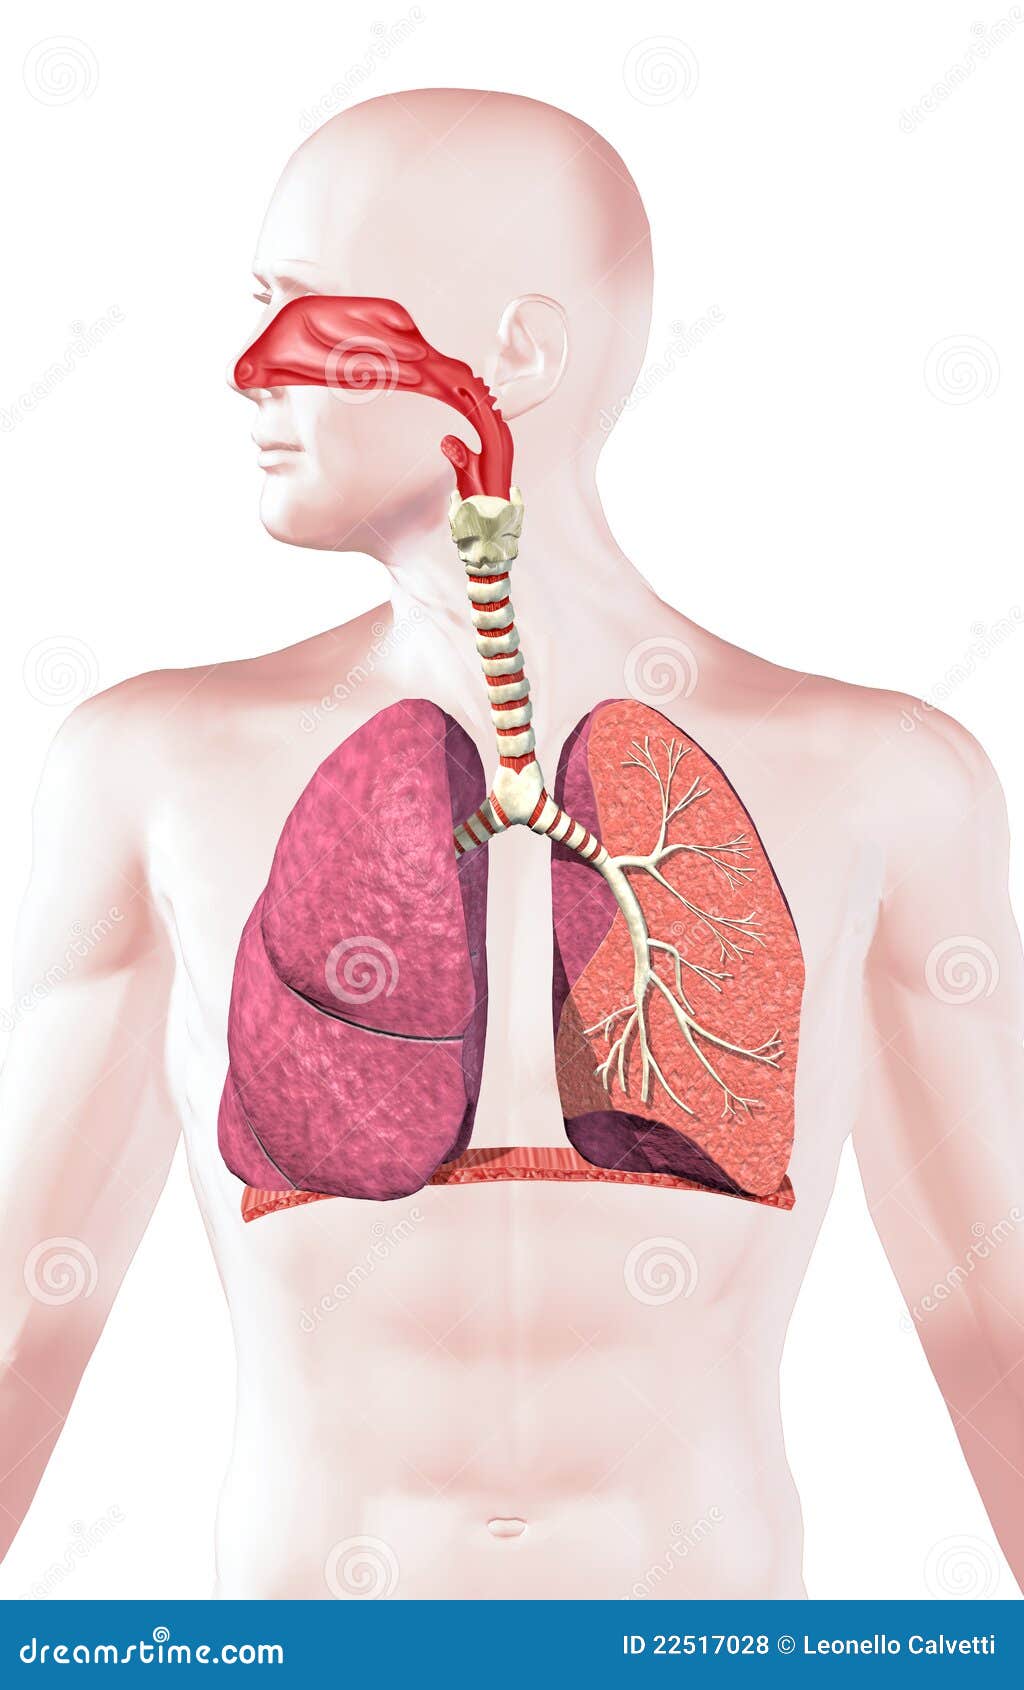 human respiratory system, cross section.